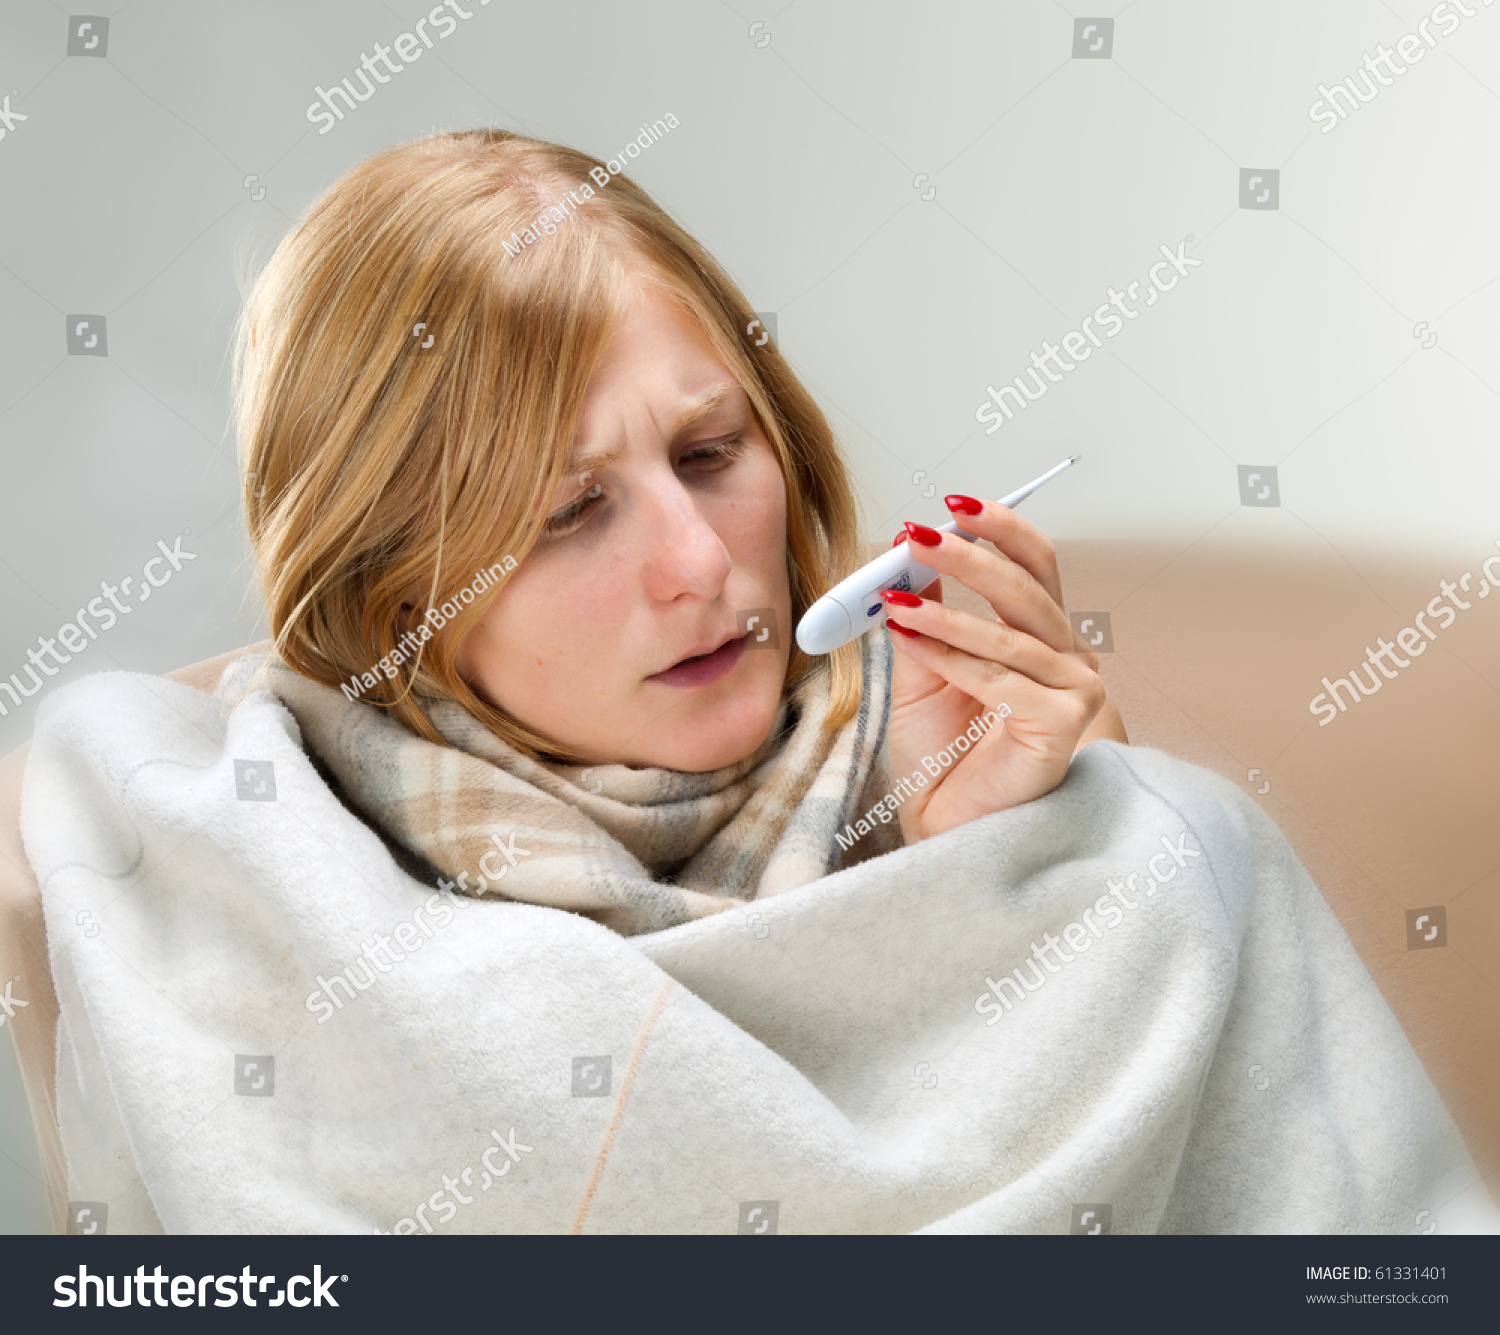 Young Ill Woman Stock Photo 61331401 : Shutterstock